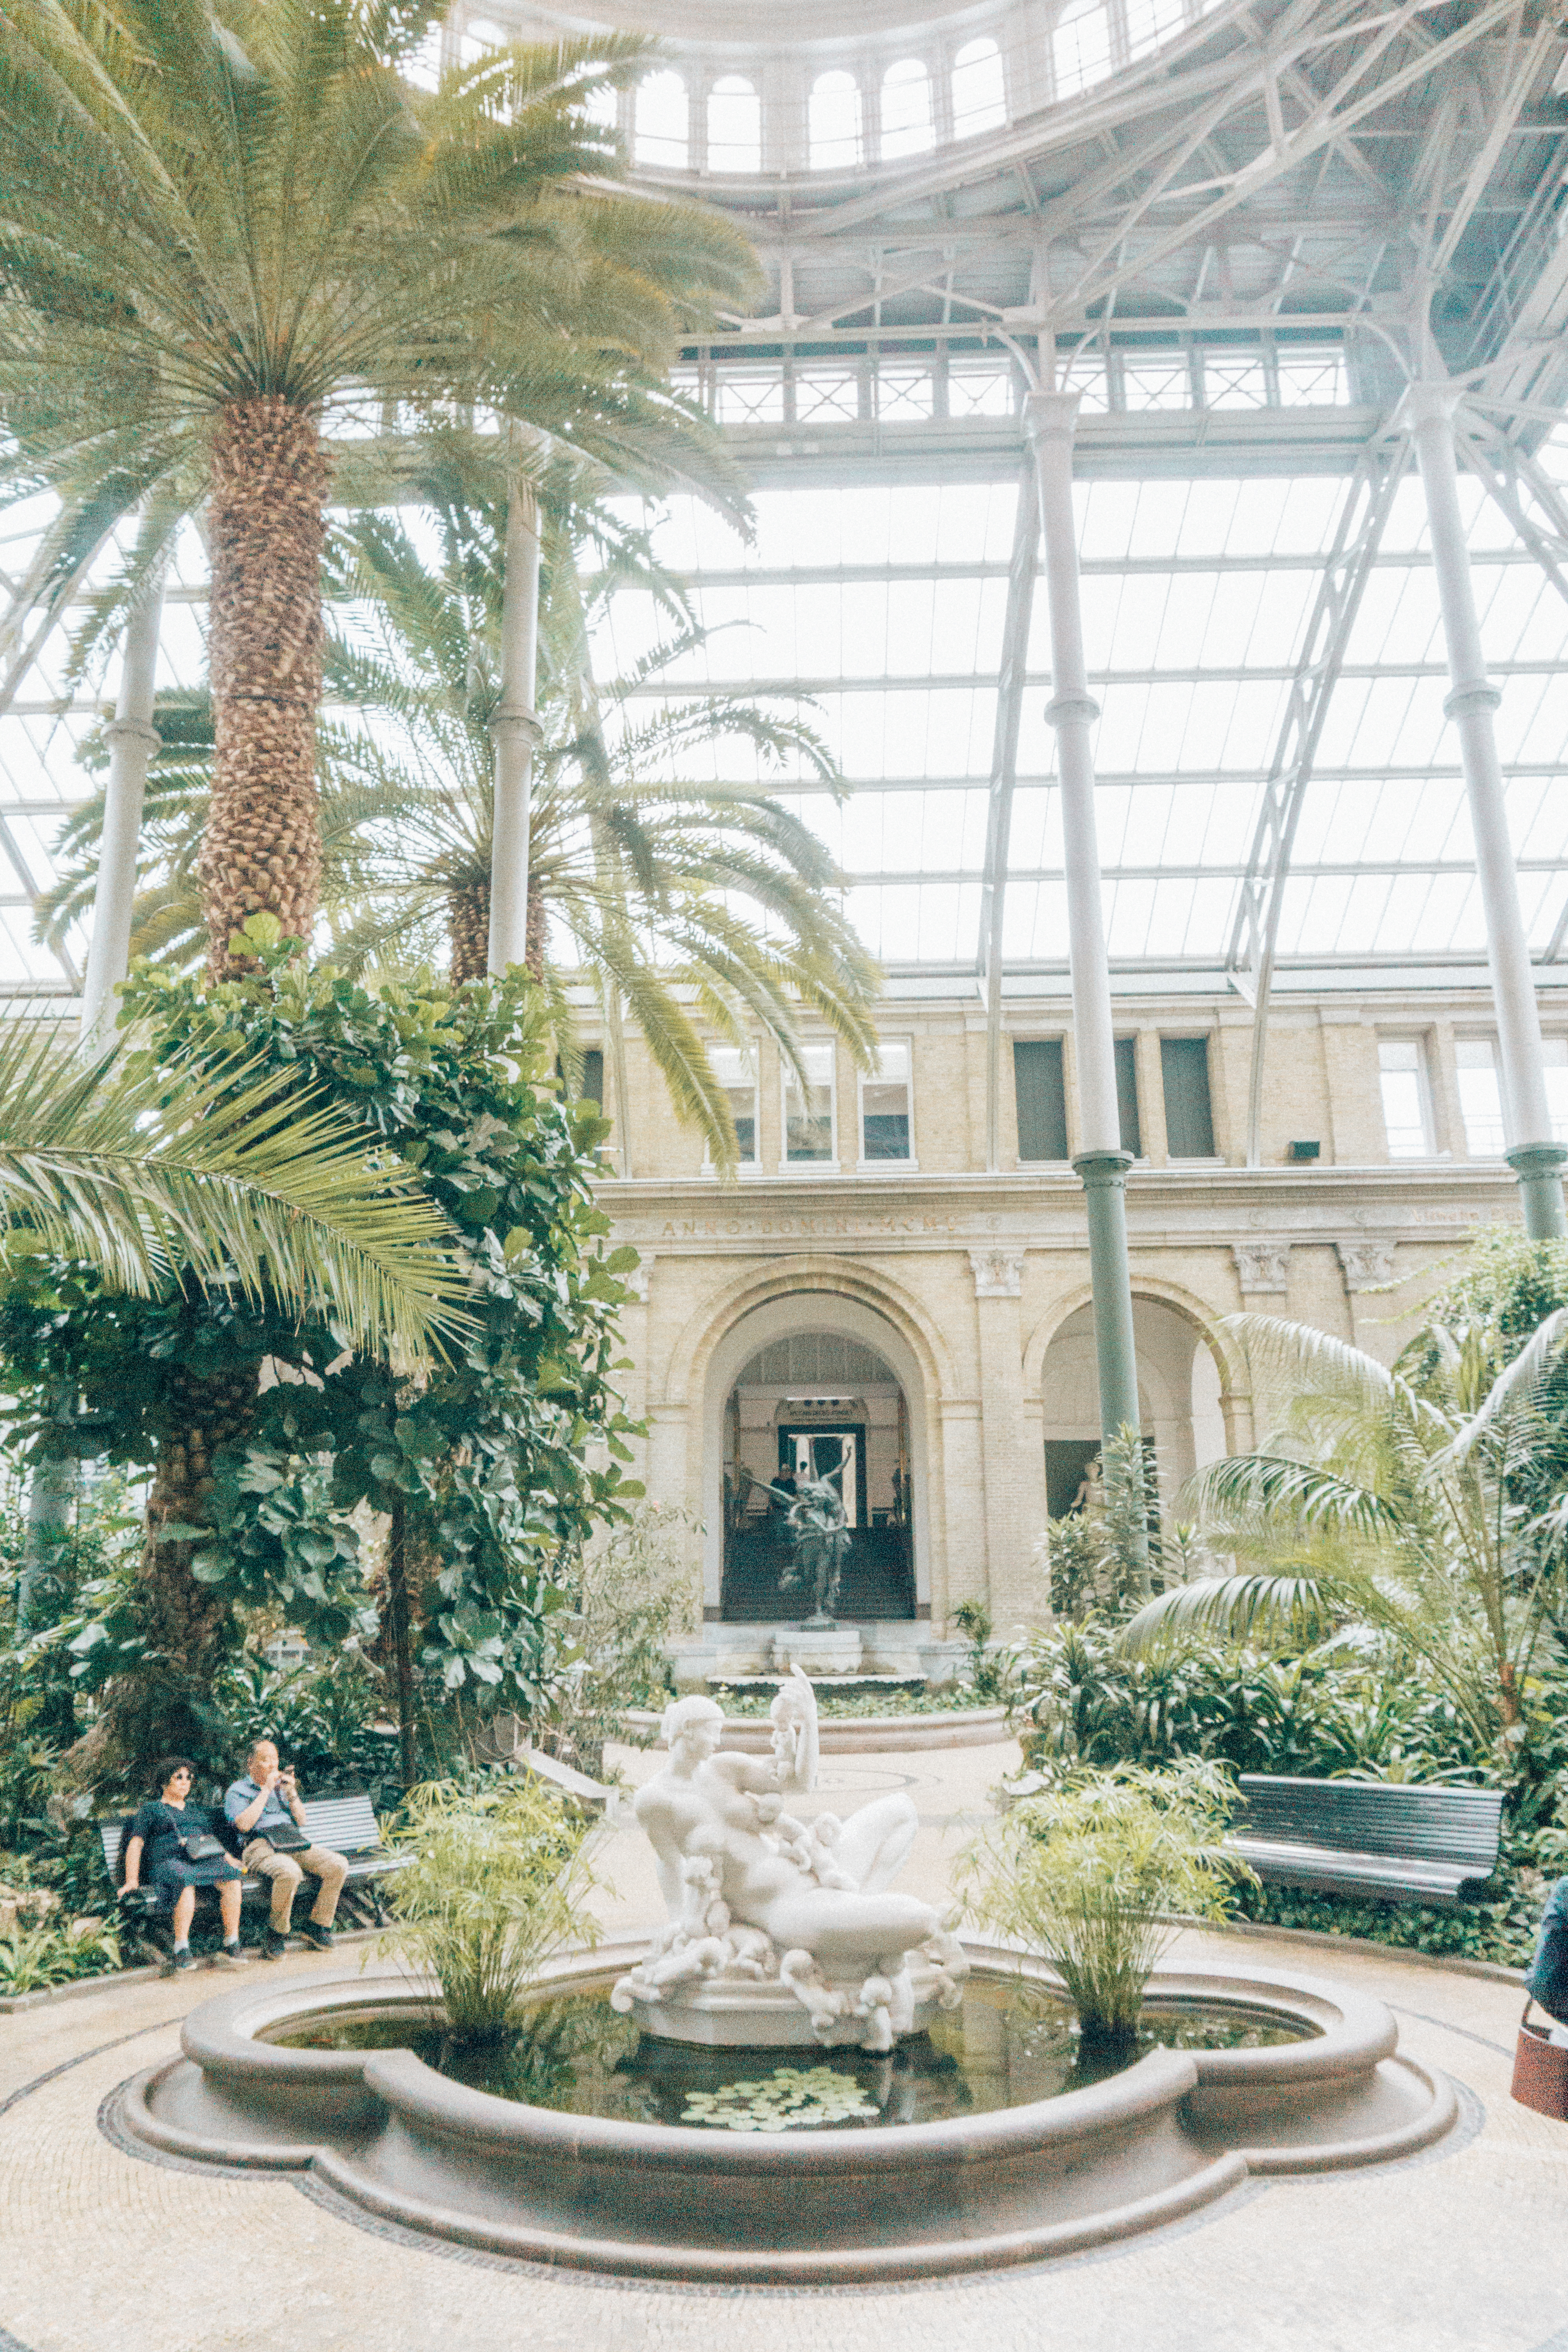 The great atrium in Copenhagen's Glyptotek with live plants, palm trees, sculptures and fountains.